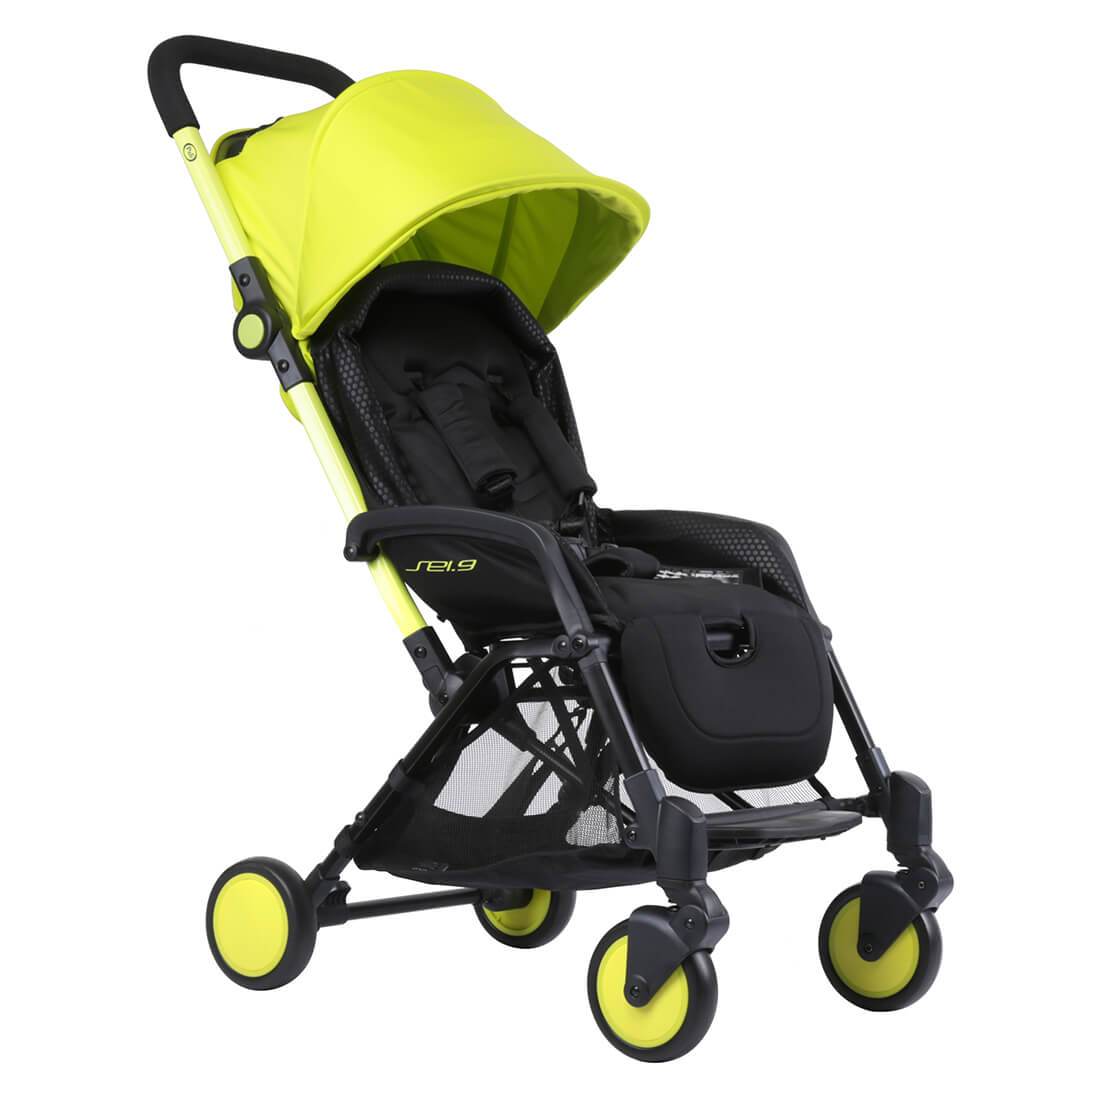 Pali Sei.9 Compact Travel Stroller - Vancouver Yellow